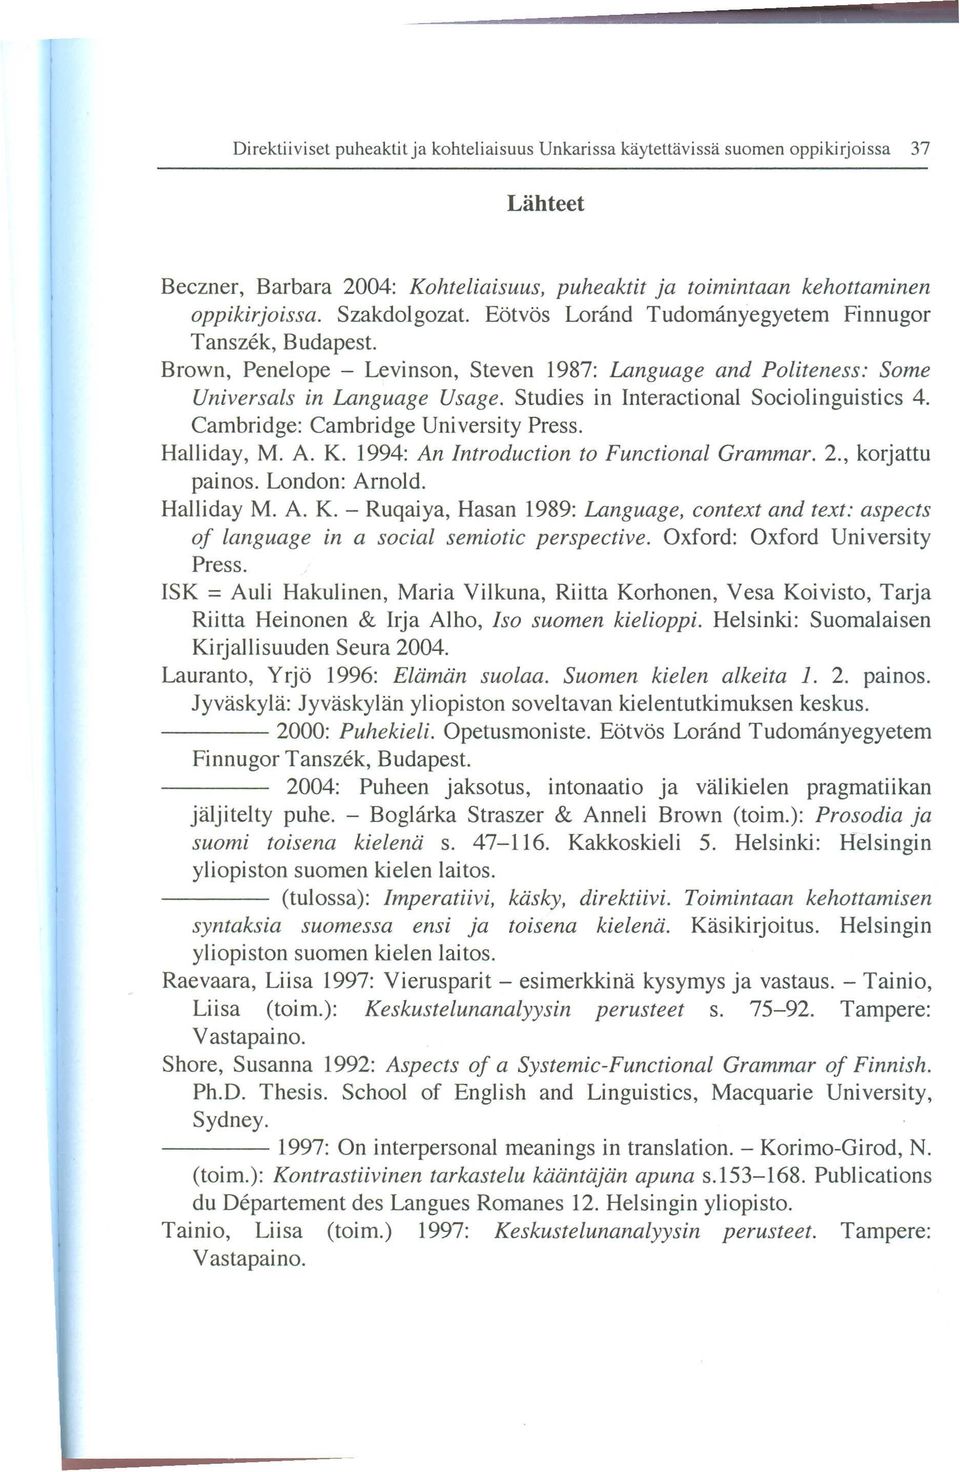 A. K. 1994: An Introduction to Functional Grammar. 2., korjattu painos. London: Arnold. Halliday M. A. K. - Ruqaiya, Hasan 1989: Language, context and text: aspects of language in a social semiotic perspective.